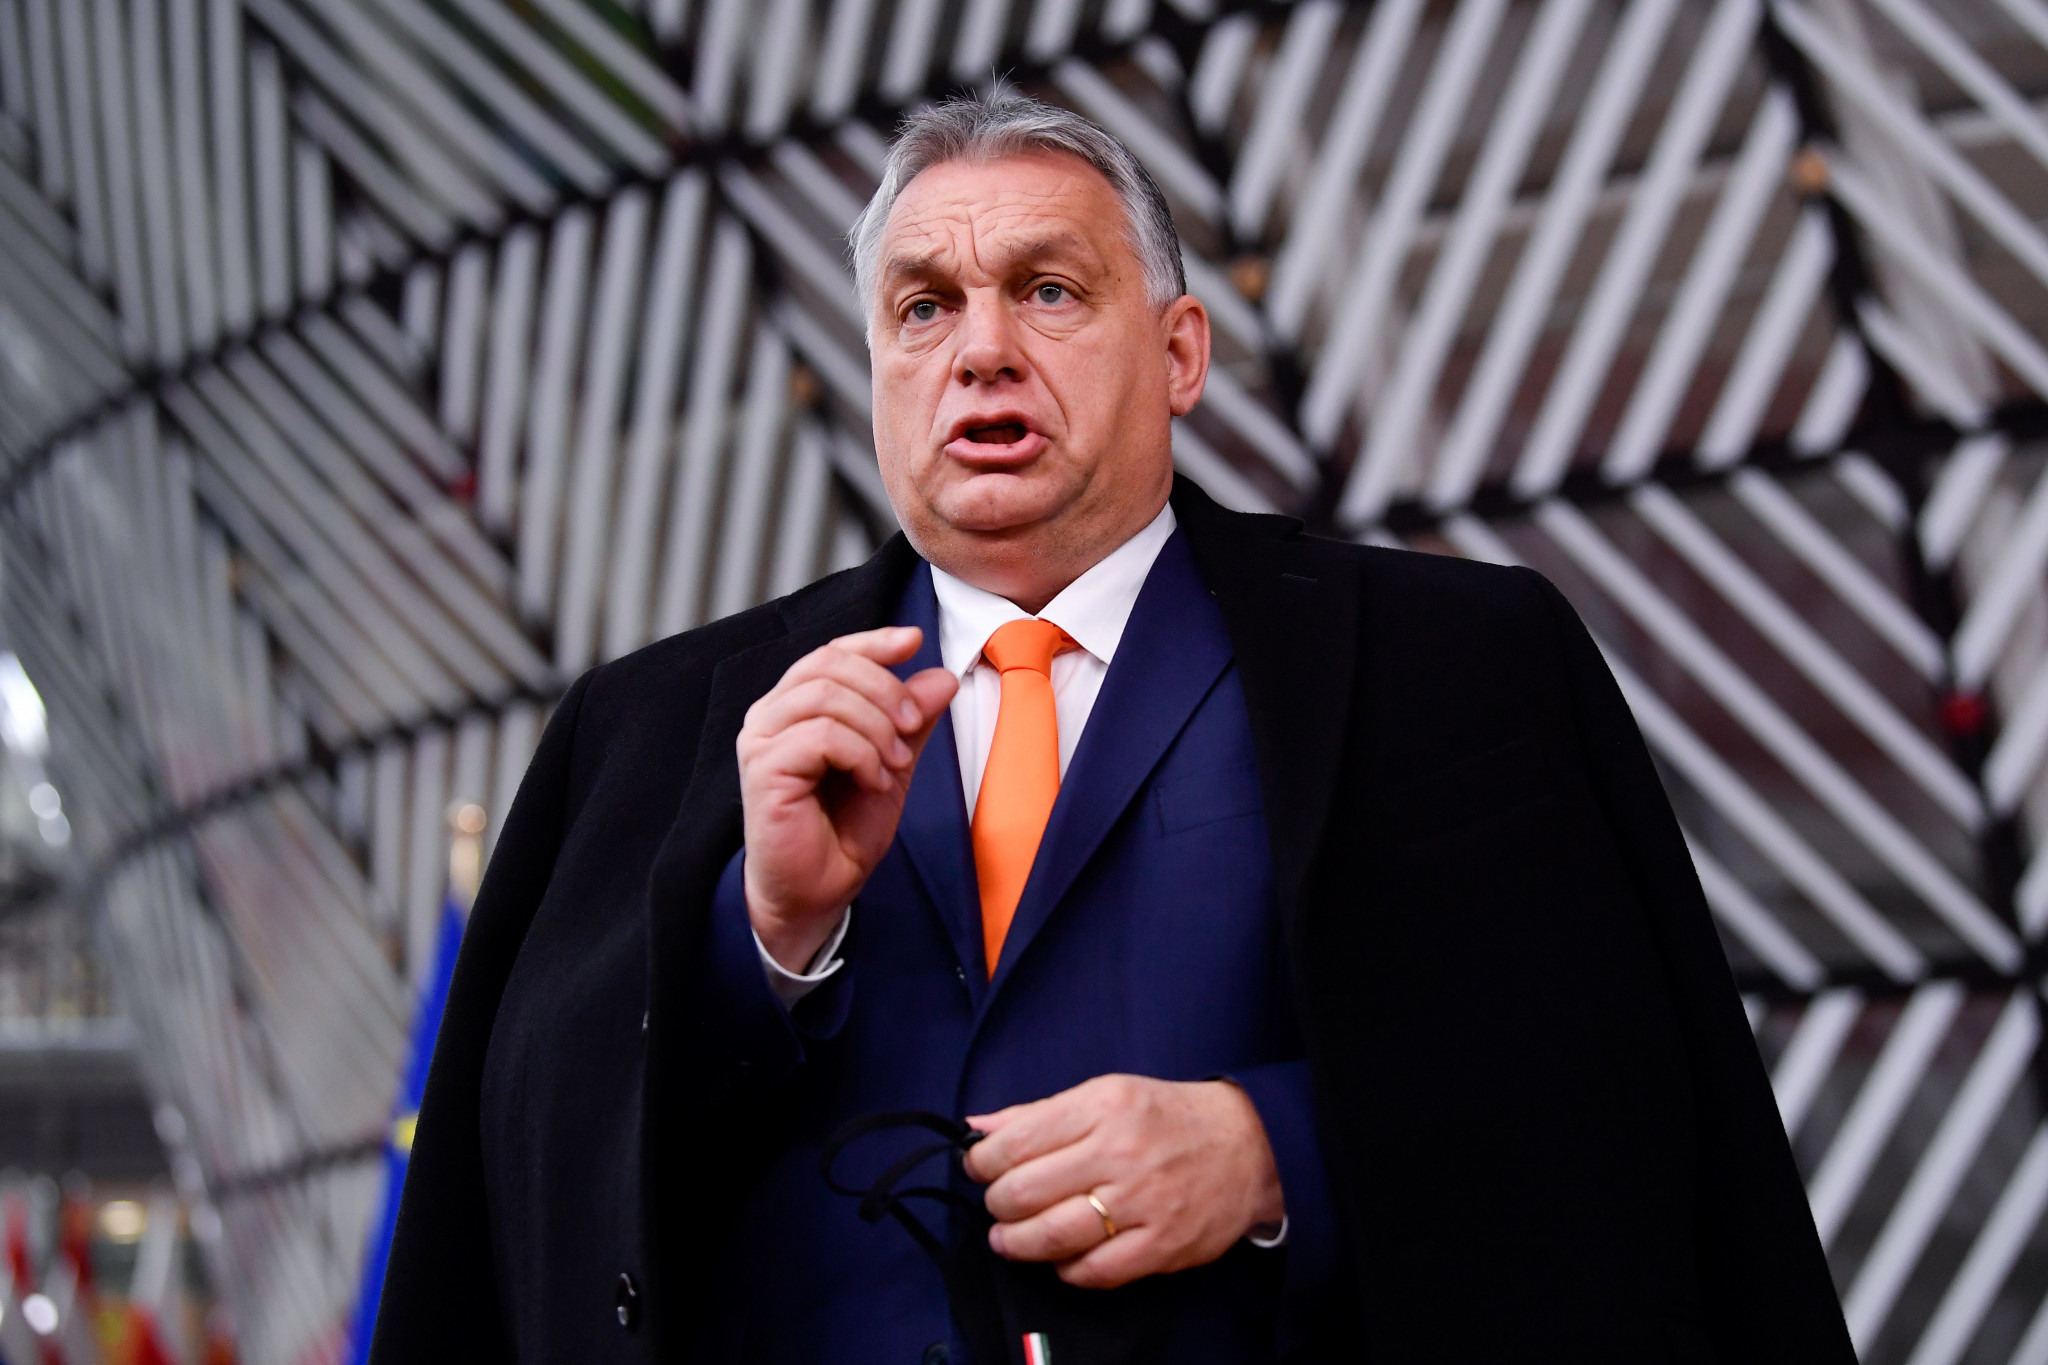 Viktor Orbán expressed his desire to see Hungary host the Olympics ©Getty Images